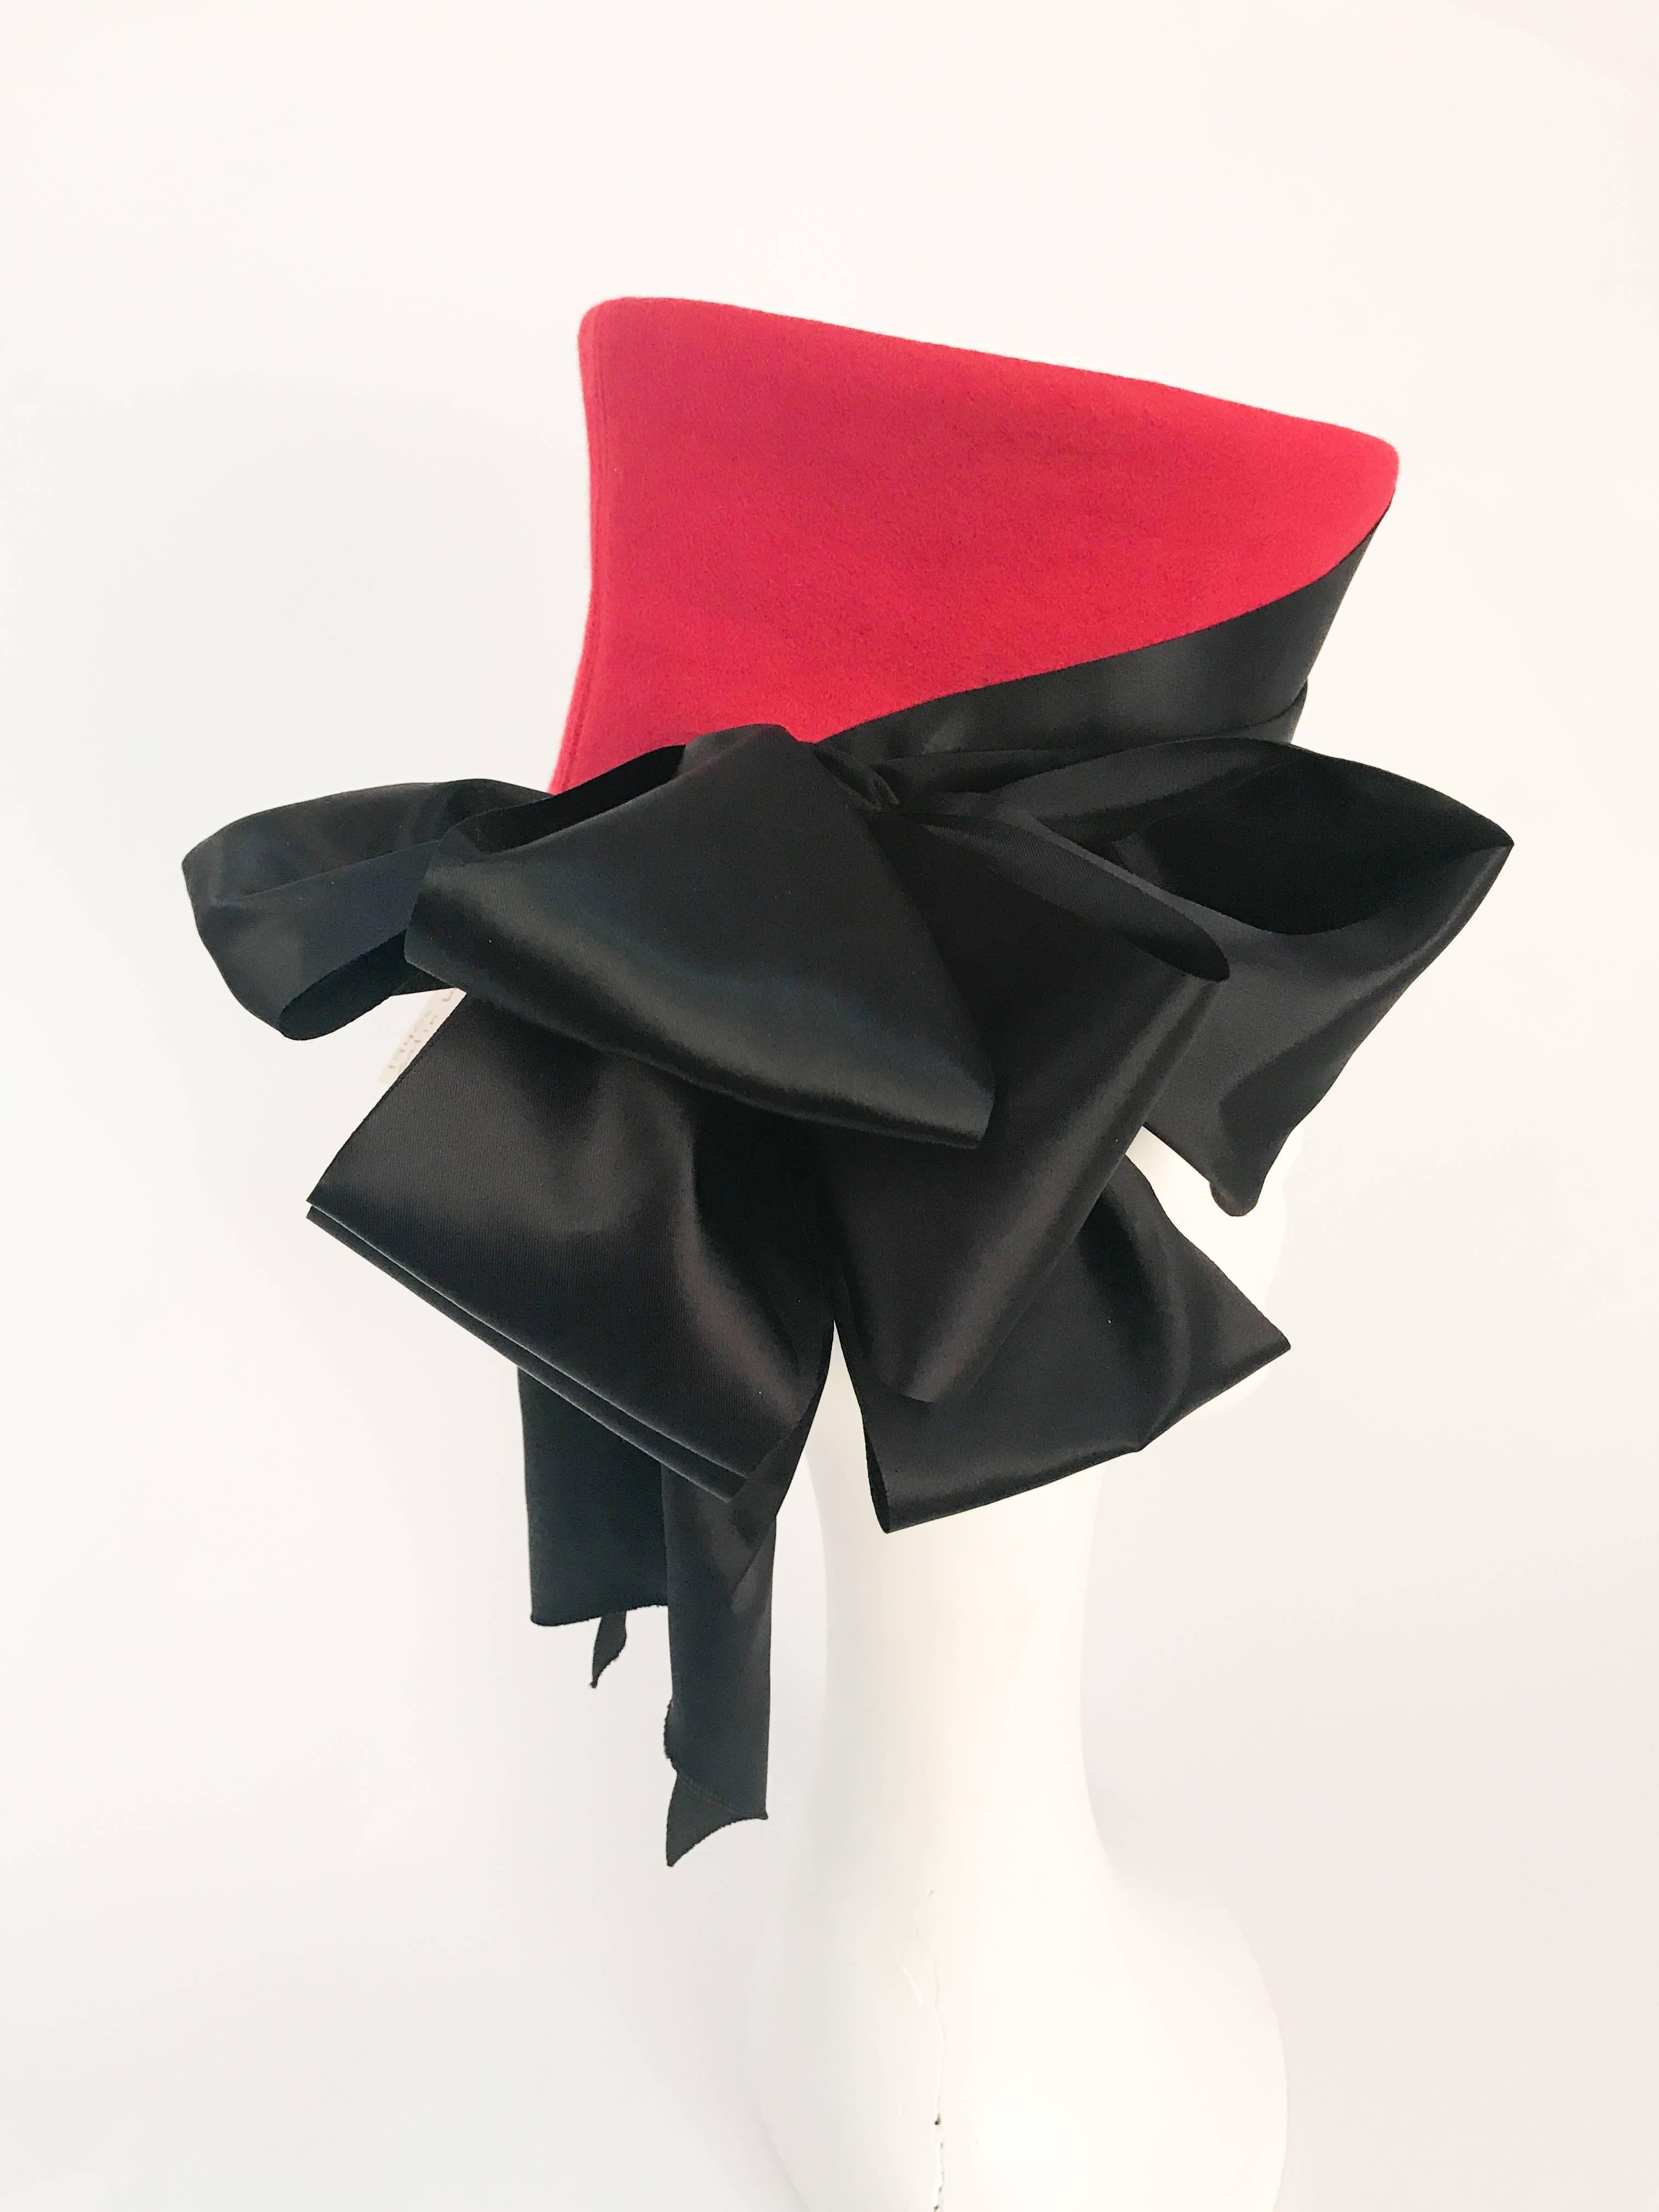 Gray 1940s Flora Weiler Rhubarb Red Tilt Hat with Satin Ribbon